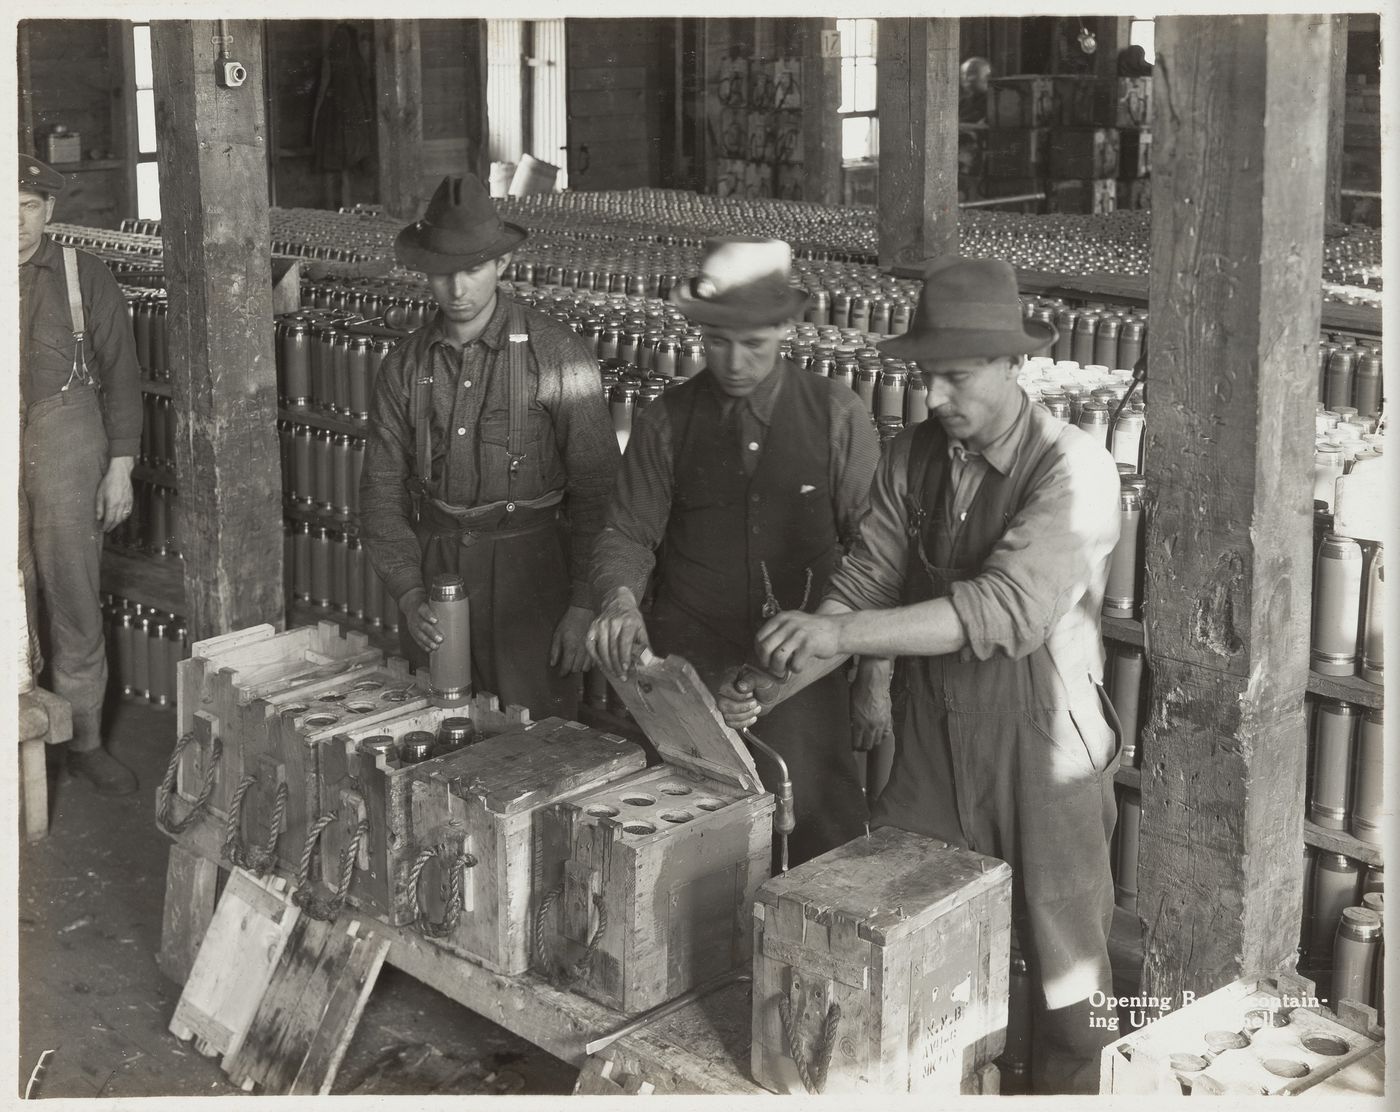 Interior view of workers opening boxes containing shells at the Energite Explosives Plant No. 3, the Shell Loading Plant, Renfrew, Ontario, Canada